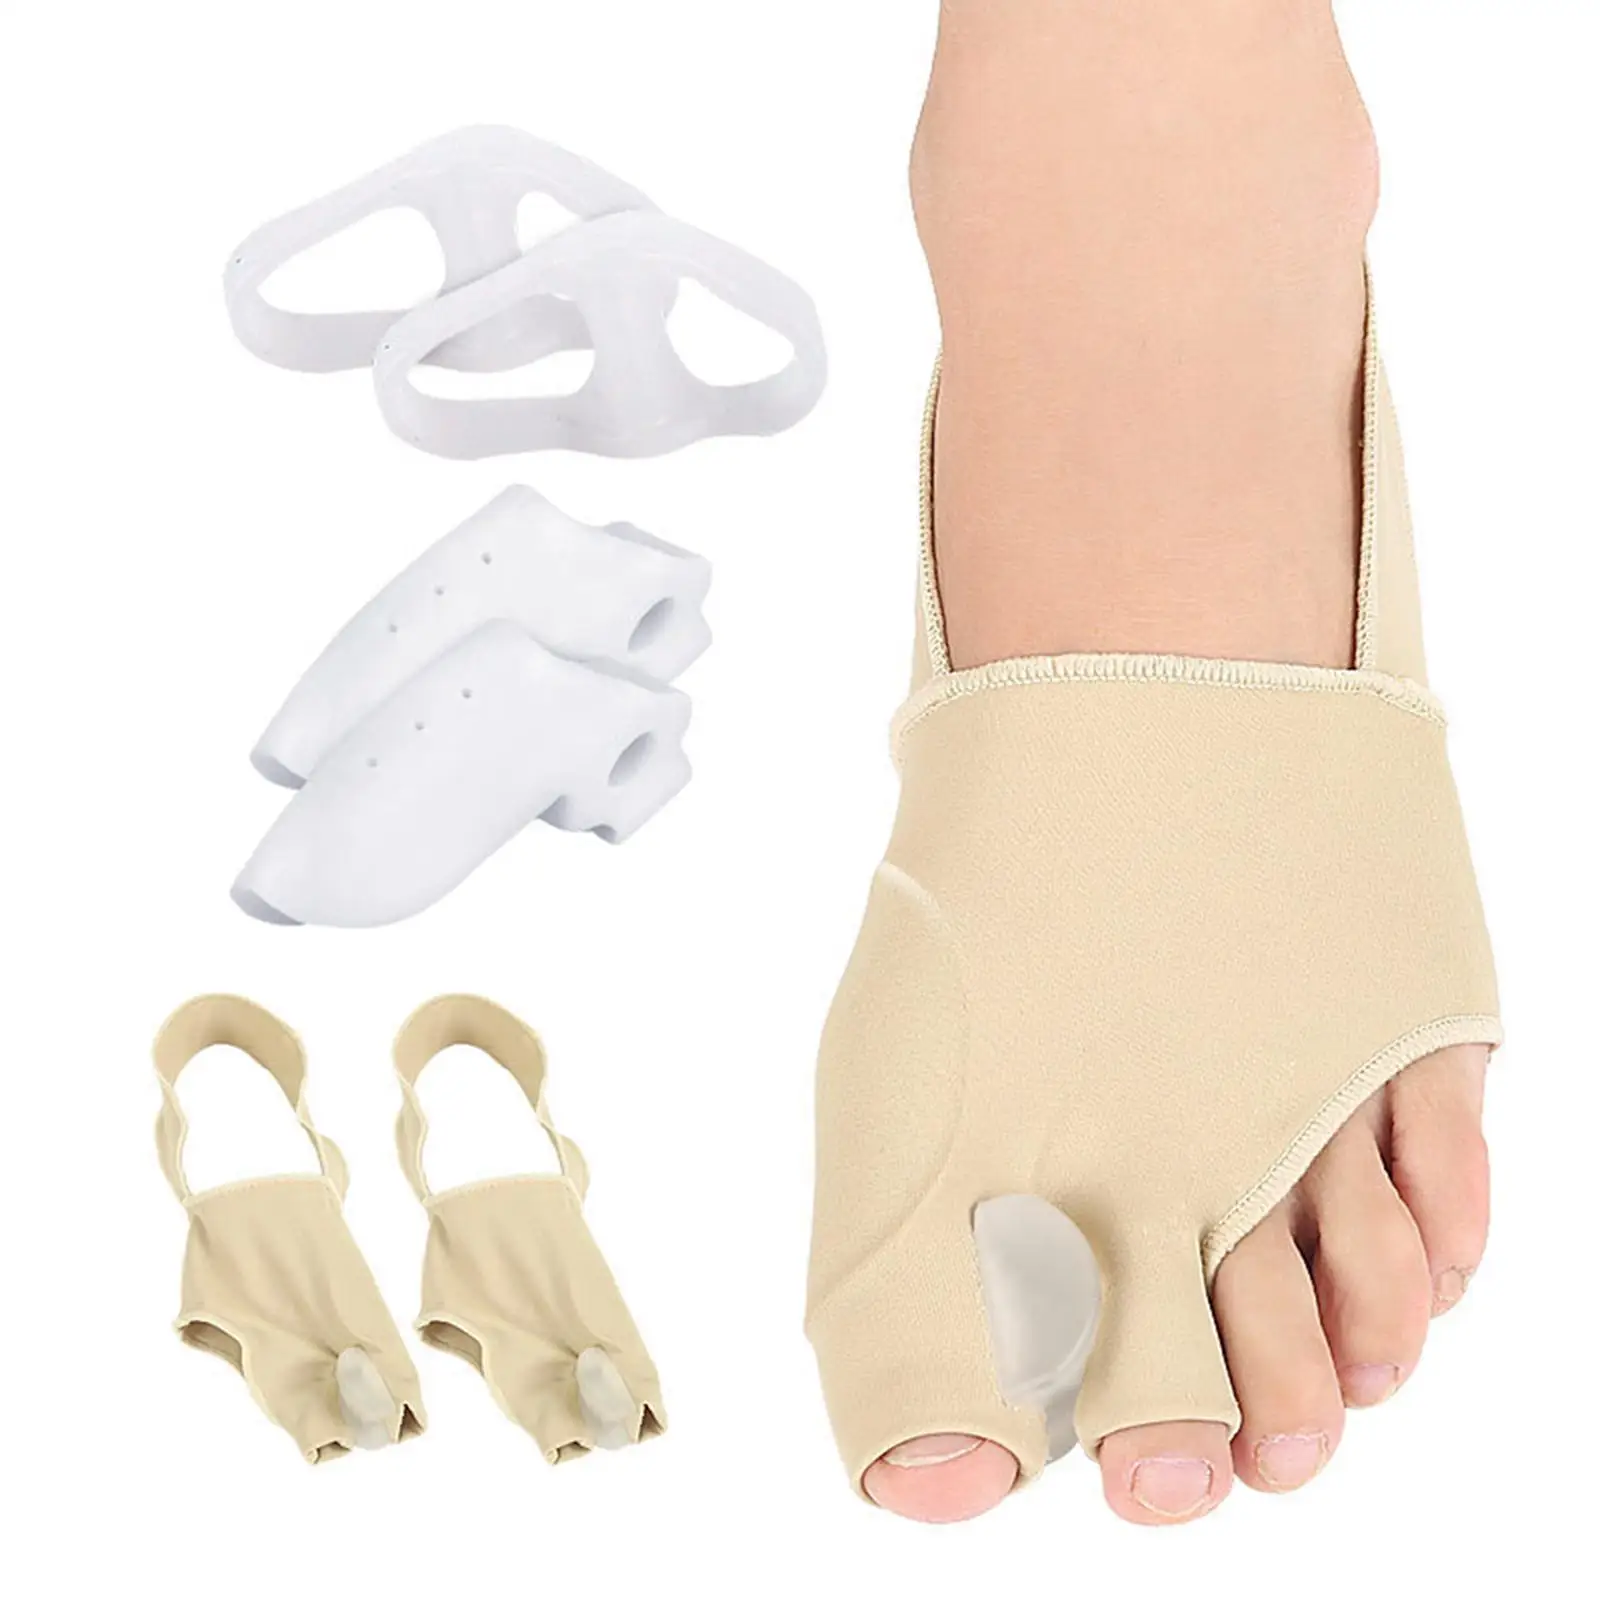 Bunion Corrector Kit Soft Bunion Relief Improves Toe Realignment Bunion Pads Sleeves Brace